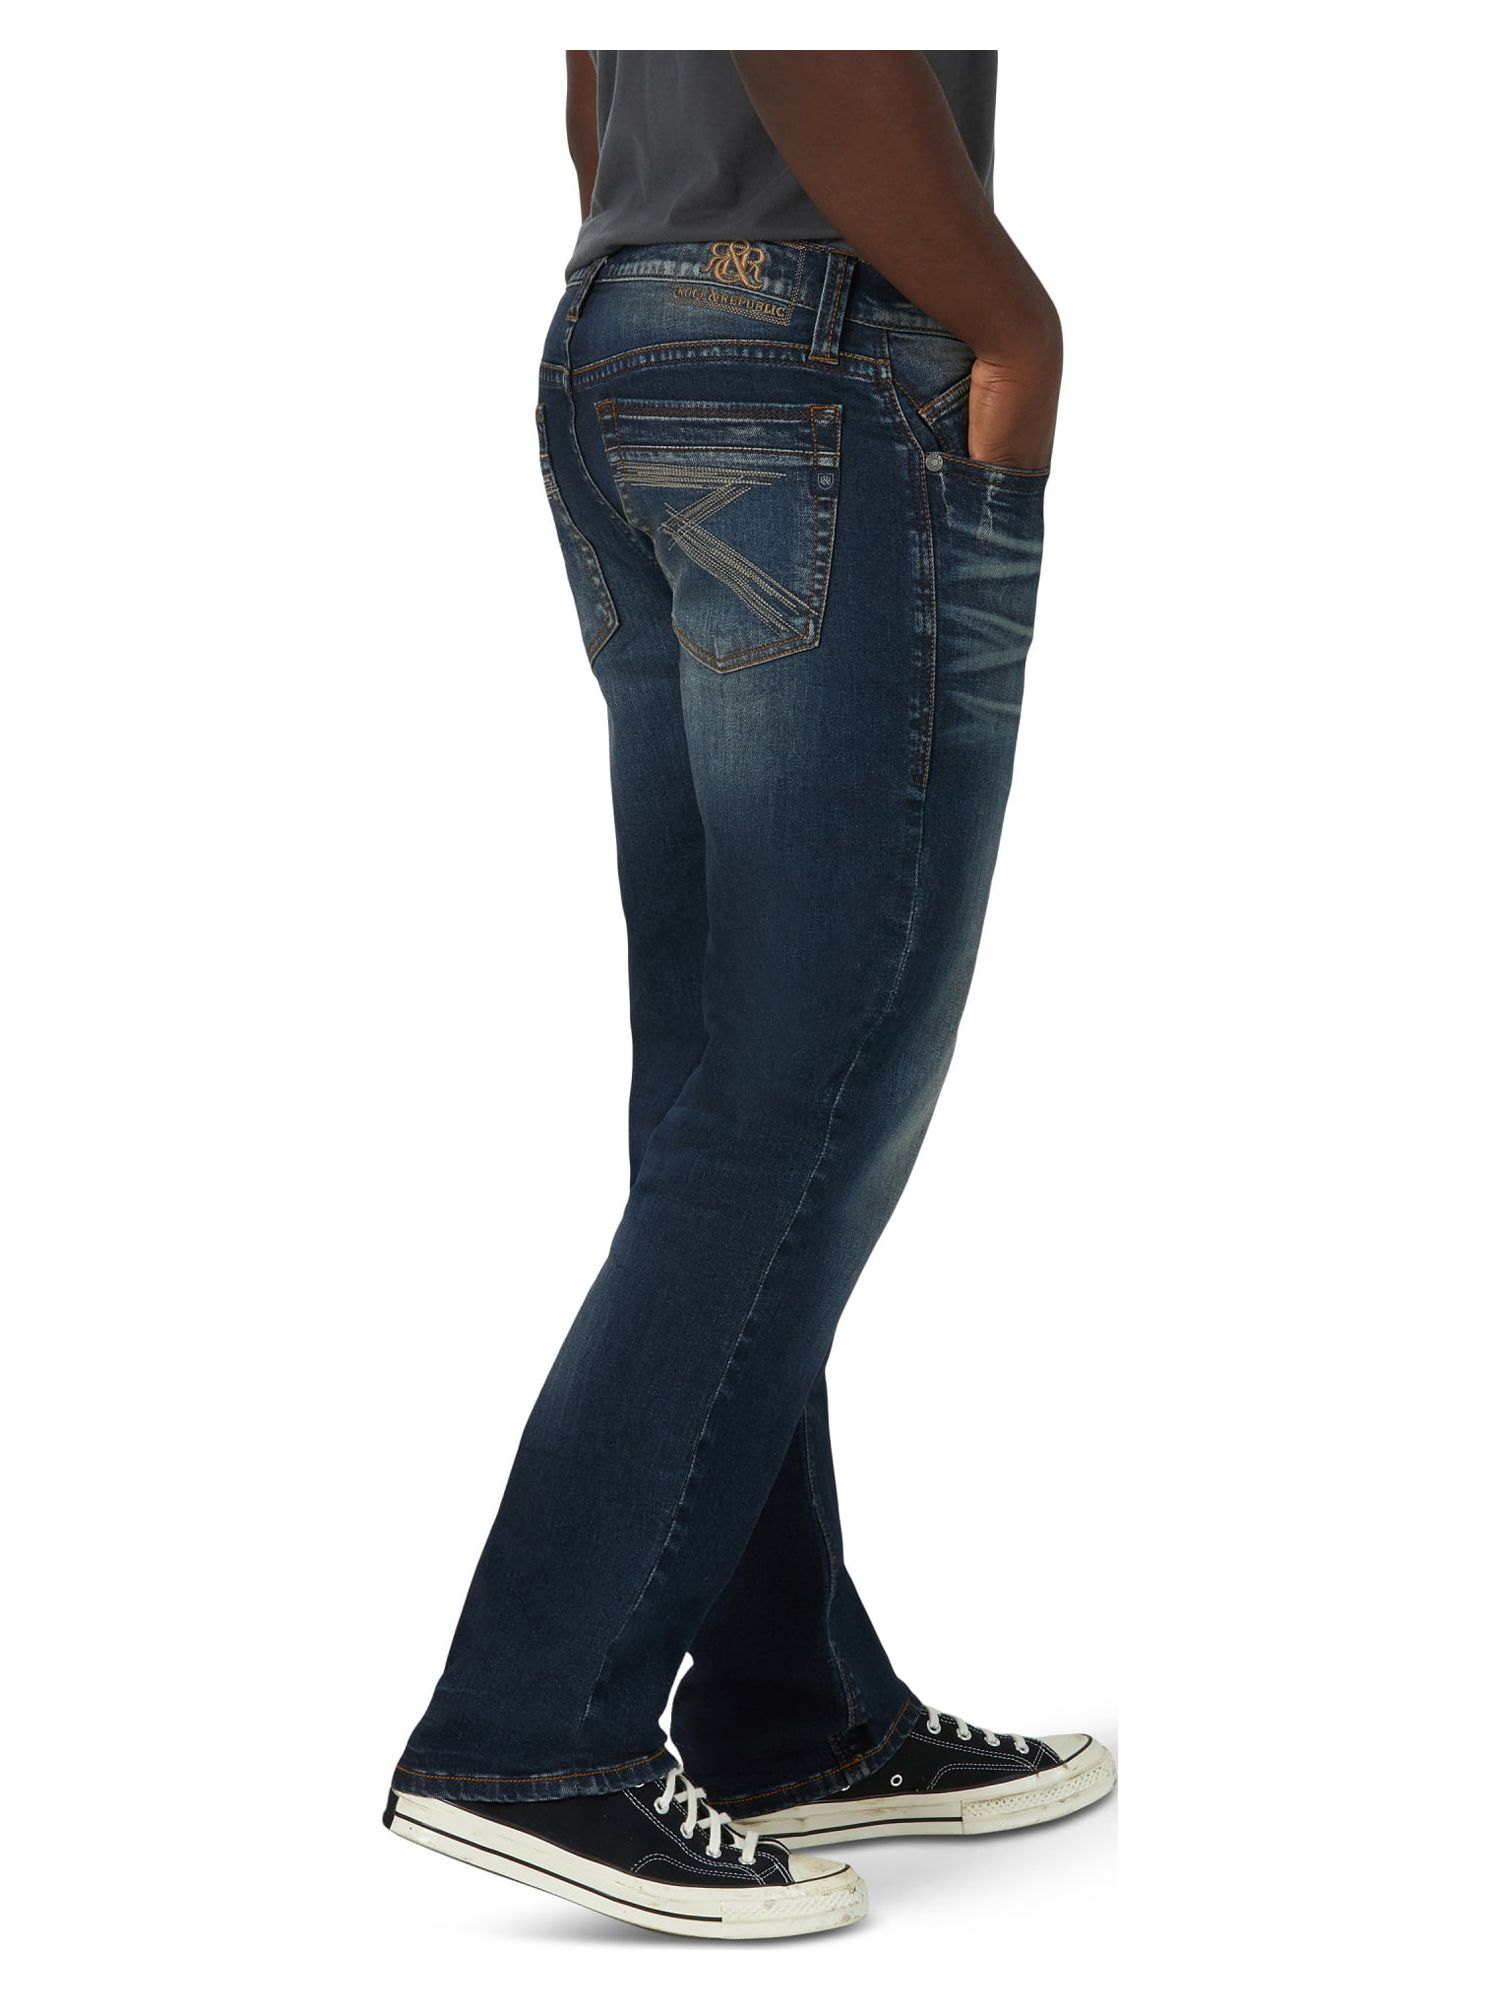 Rock & Republic Men's Relaxed Straight Leg Jean with Ultra Comfort Denim - image 3 of 6